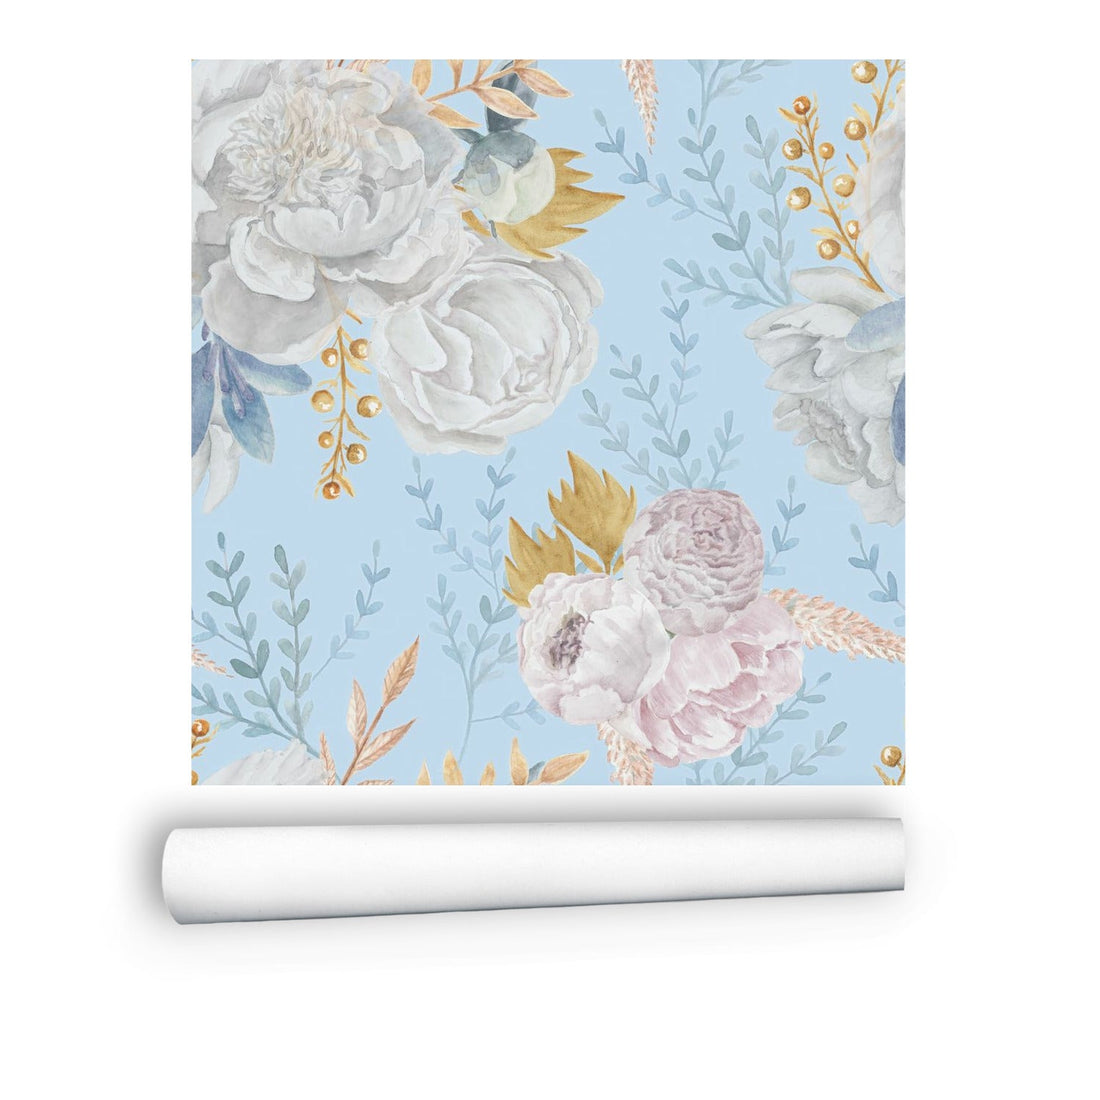 Kate McEnroe New York Pastel Blue And White Peony Floral Wall MuralWall Mural119302